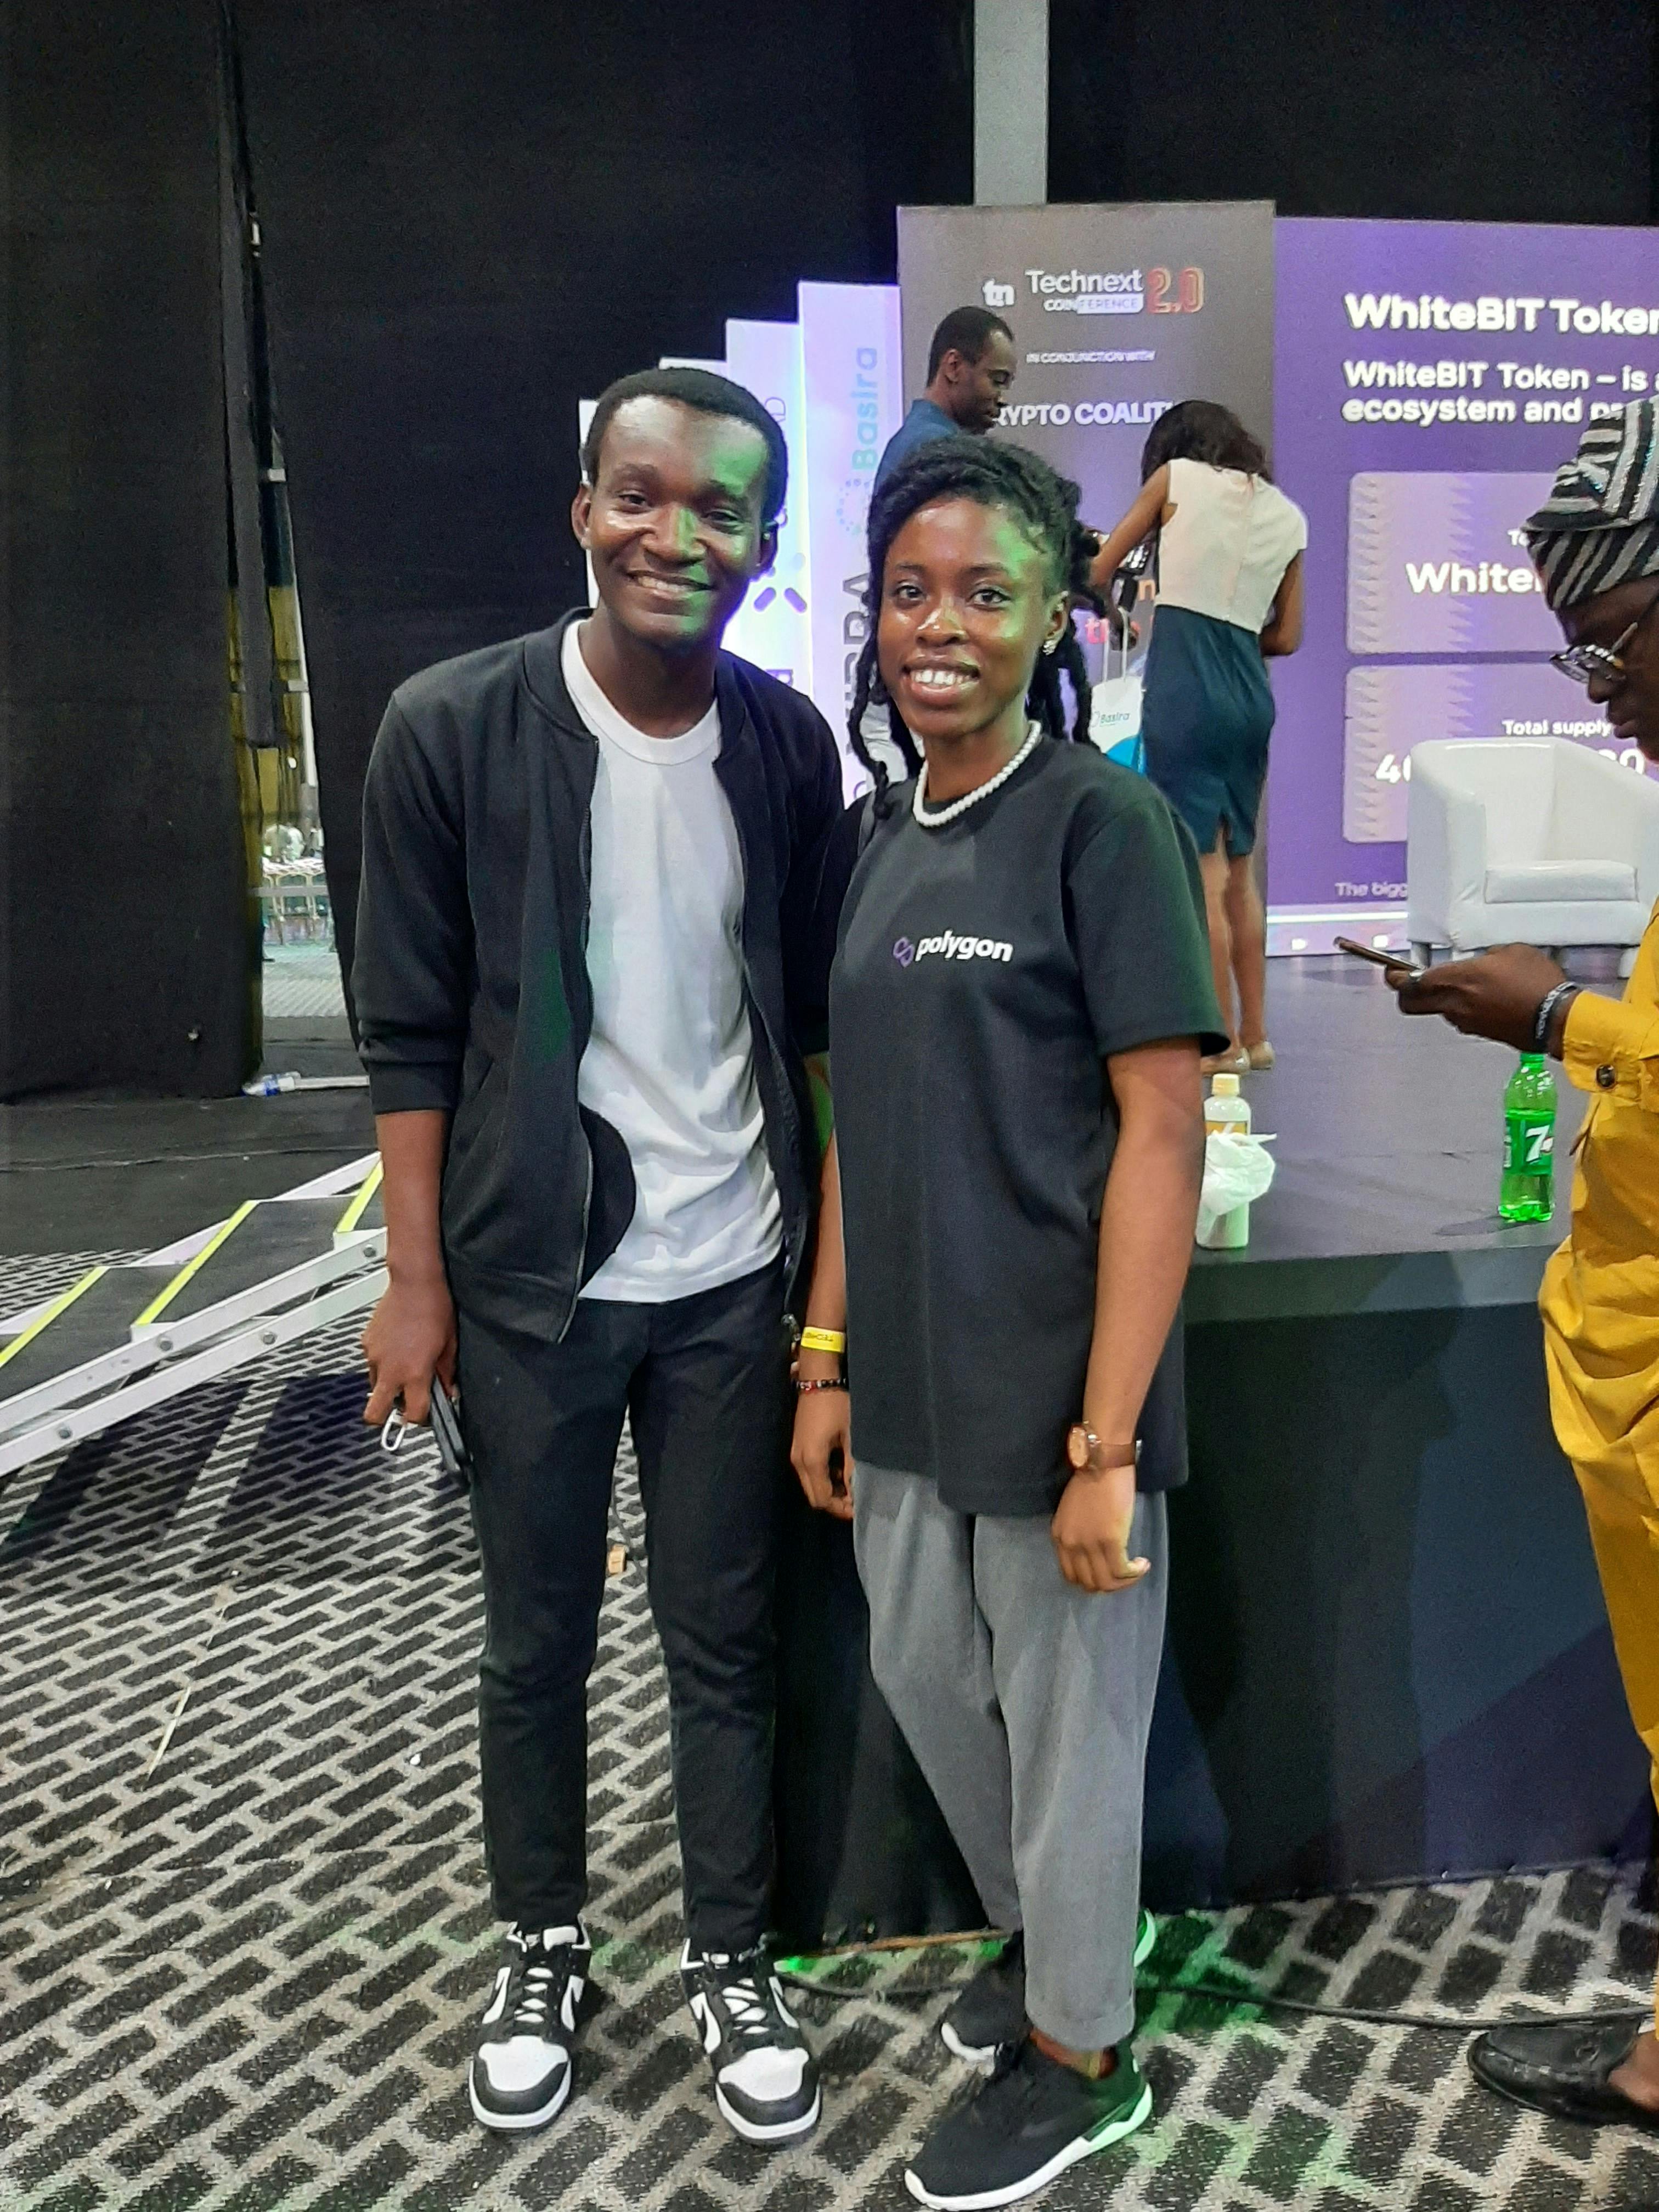 A picture of me with Ayomide Shodipo of polygon